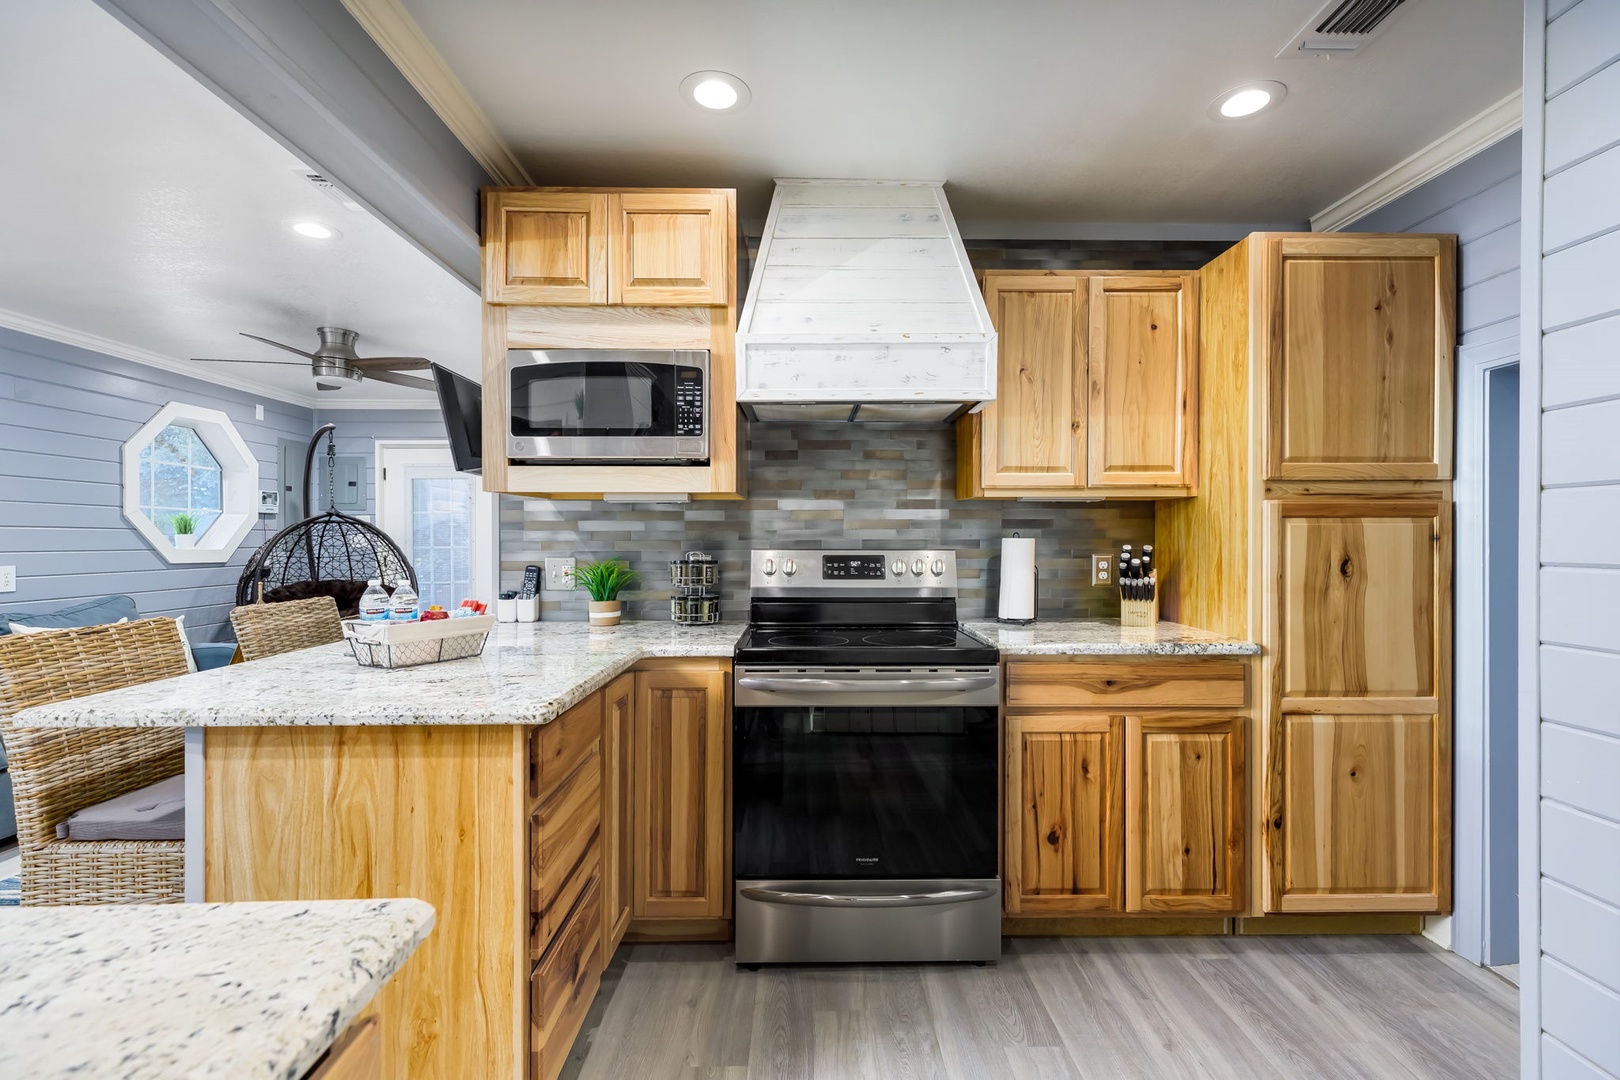 The inviting open kitchen offers ample space & all the comforts of home